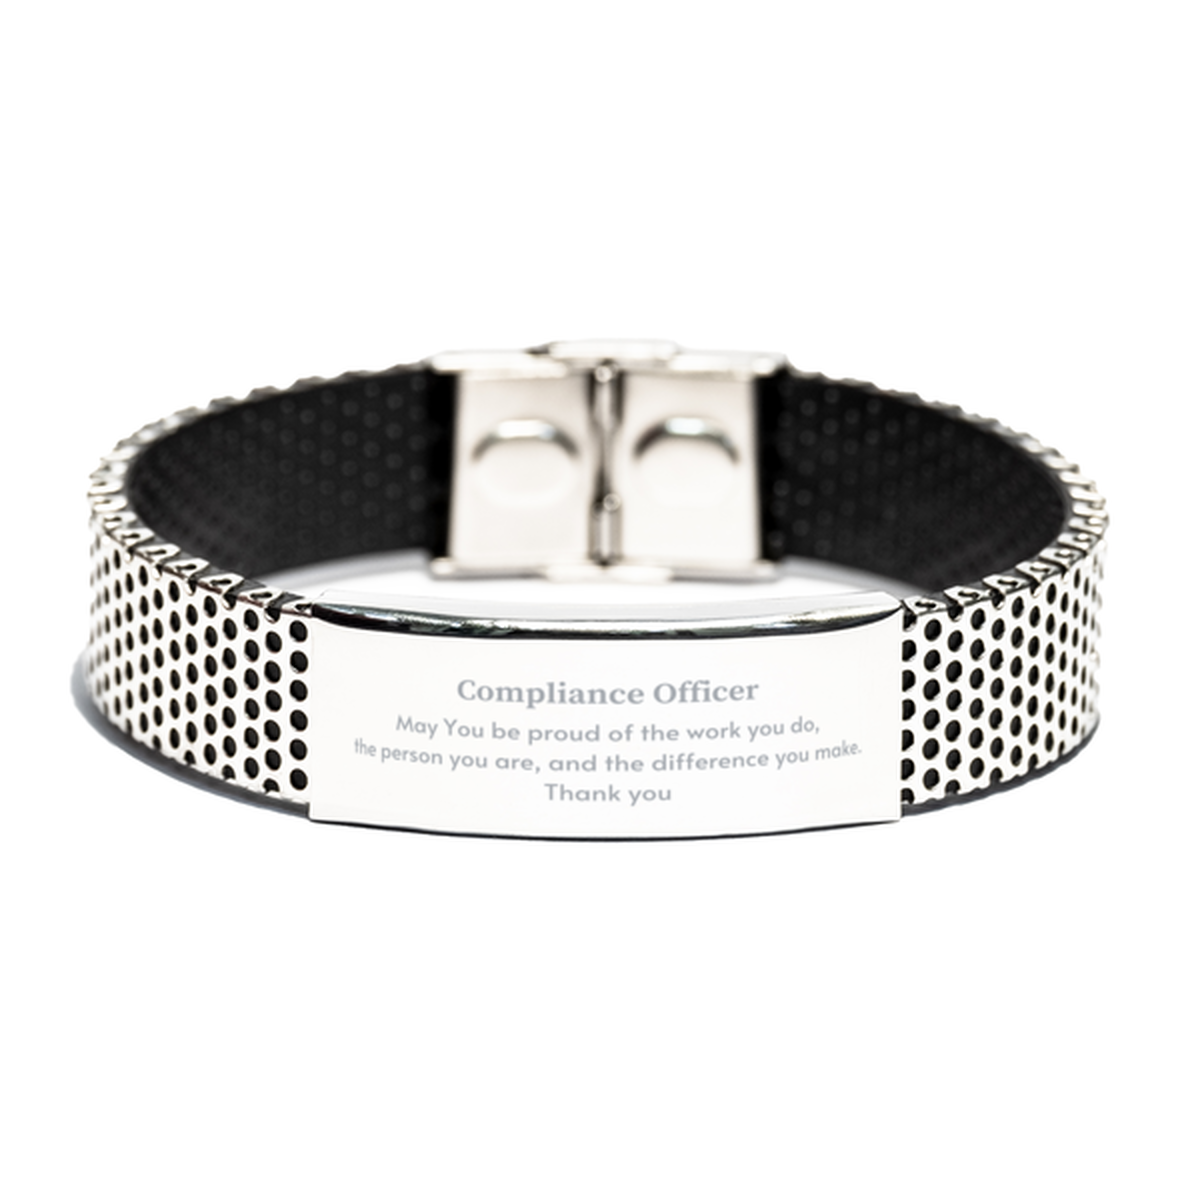 Heartwarming Stainless Steel Bracelet Retirement Coworkers Gifts for Compliance Officer, Compliance Officer May You be proud of the work you do, the person you are Gifts for Boss Men Women Friends